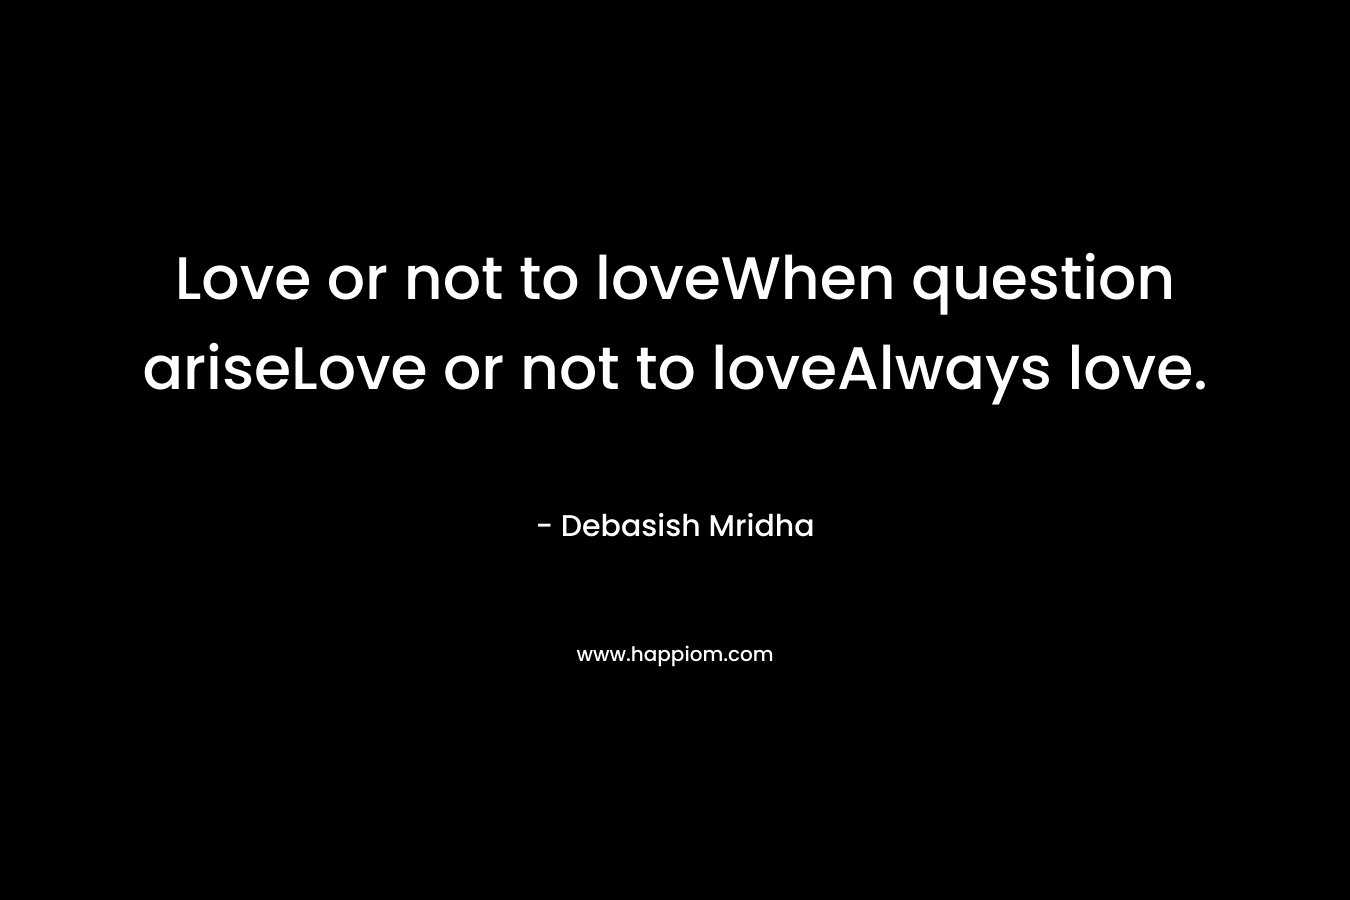 Love or not to loveWhen question ariseLove or not to loveAlways love.